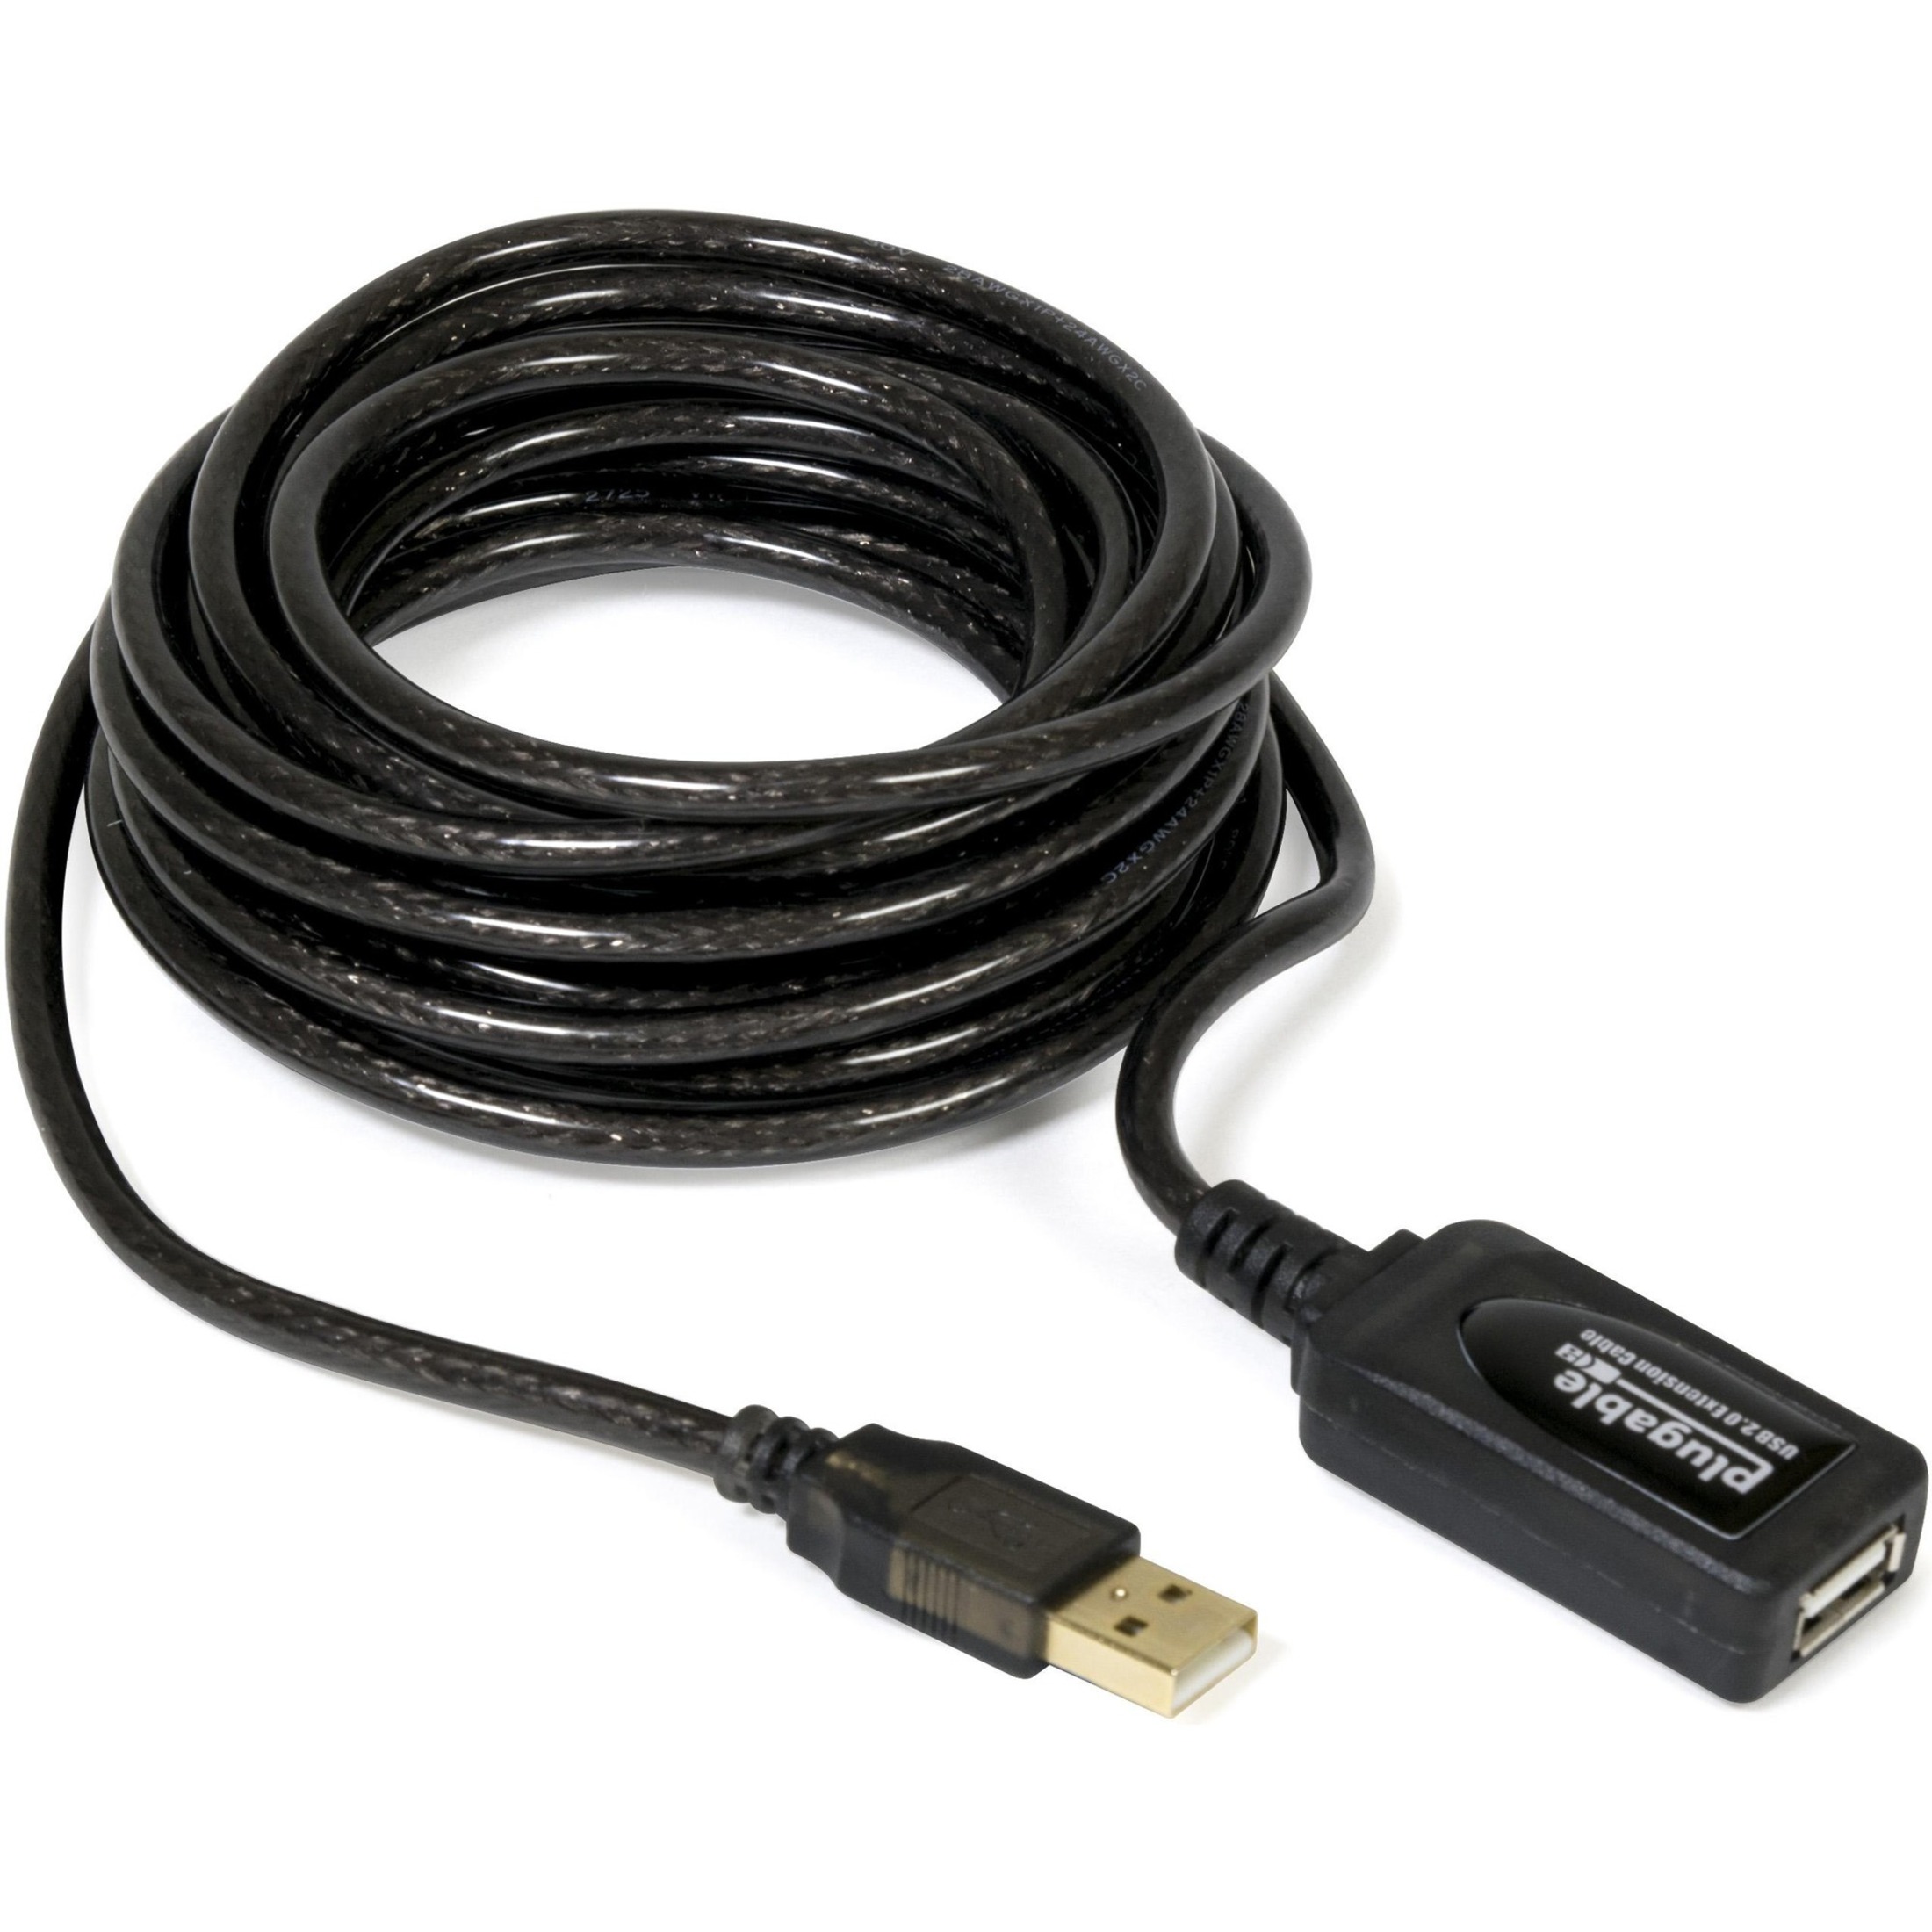 Plugable 5 Meter (16 Foot) USB 2.0 Active Extension Cable Type A Male to A Female - image 1 of 3